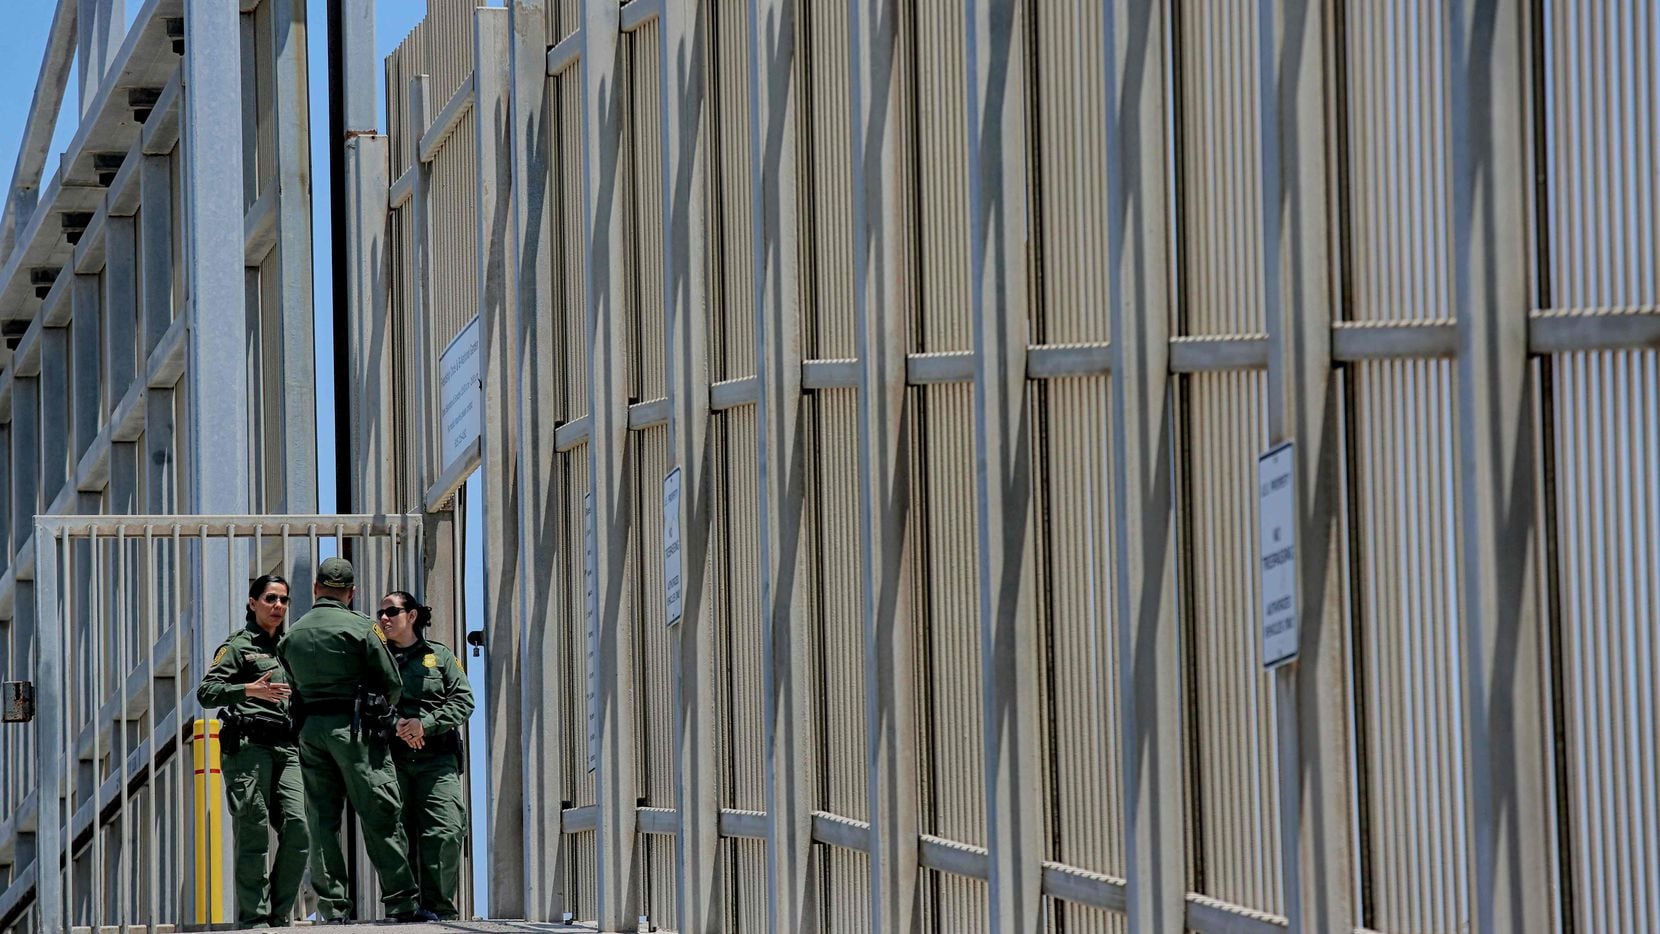 US Customs and Border Protection agents patrol the United States-Mexico Border wall at Friendship Park in San Ysidro, Calif., recently.